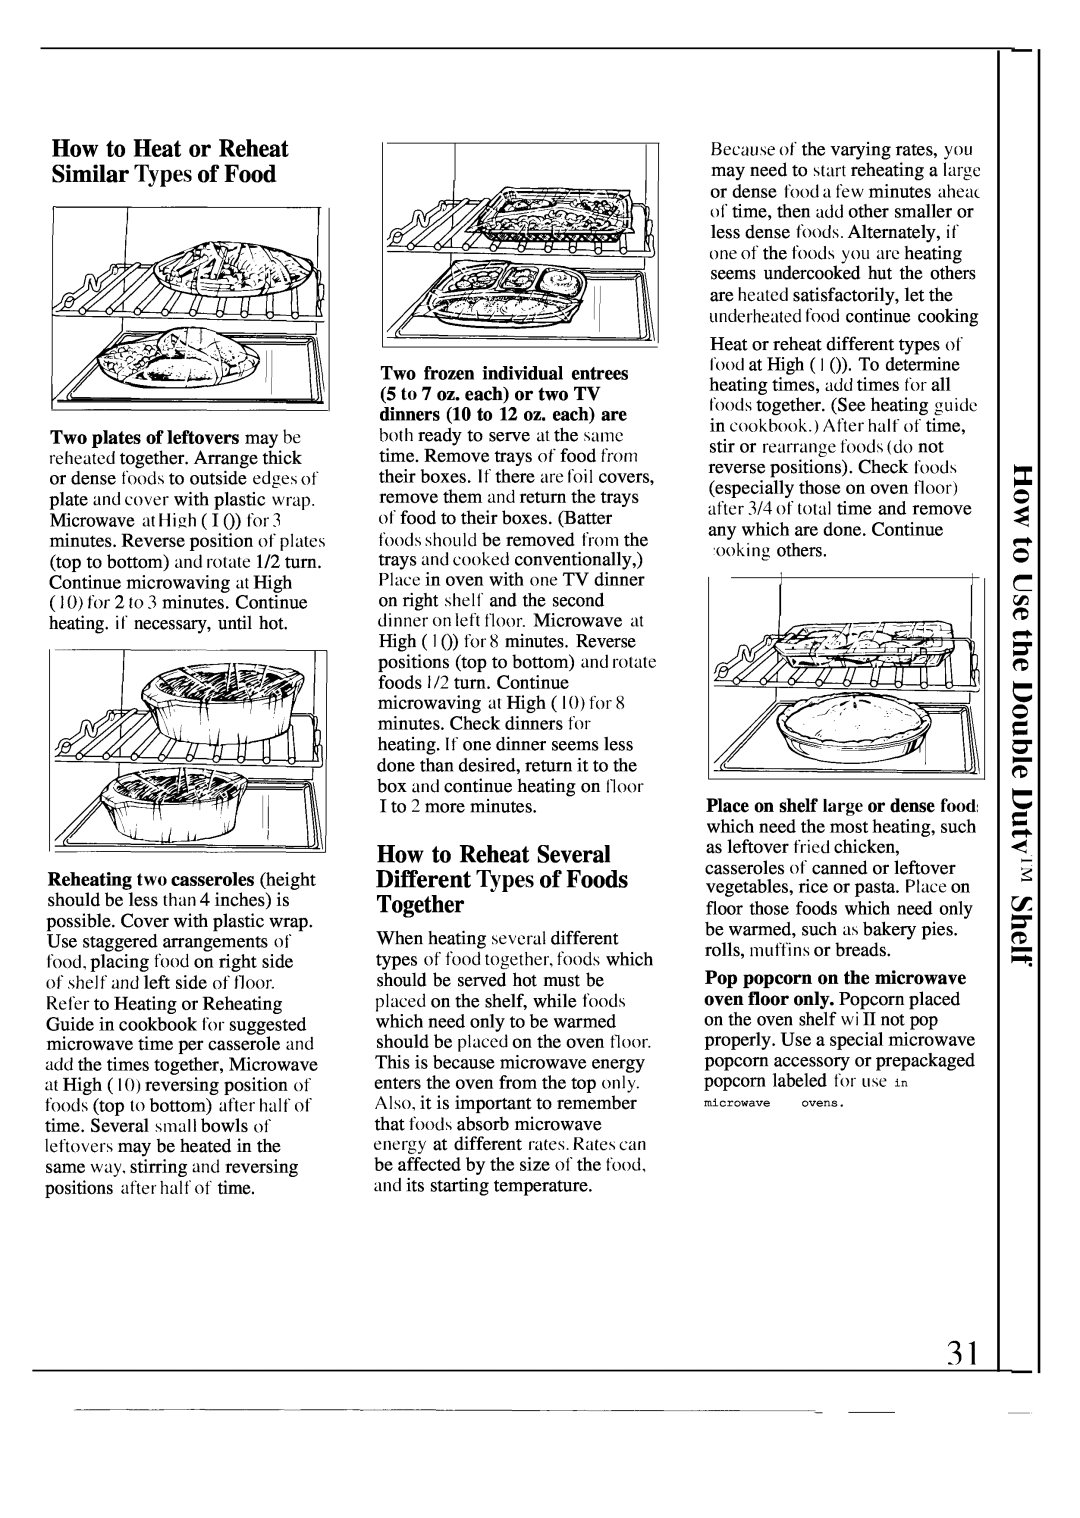 GE JE1468K manual How to Reheat Several Different ~pes of Foods Together, How to Heat or Reheat Similar ~pes of Food 